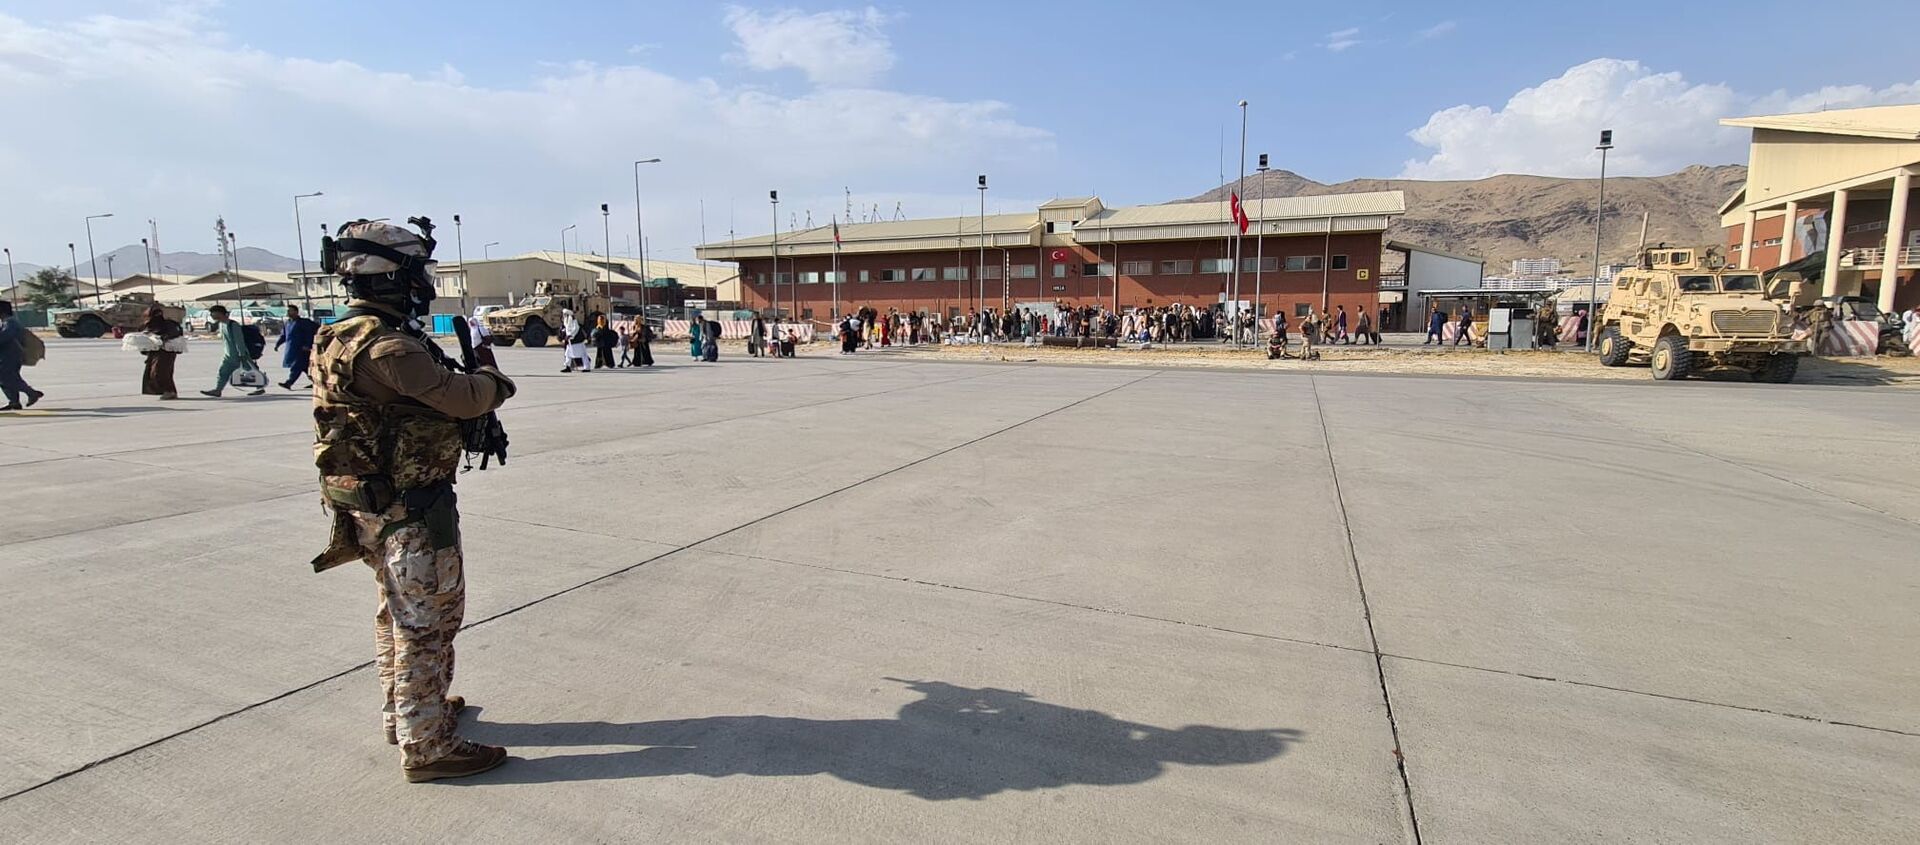 Afghan evacuees queue before boarding Italy's military aircraft C130J during evacuation at Kabul's airport, Afghanistan, August 22, 2021. Italian Ministry of Defence/Handout via REUTERS  - Sputnik International, 1920, 25.08.2021